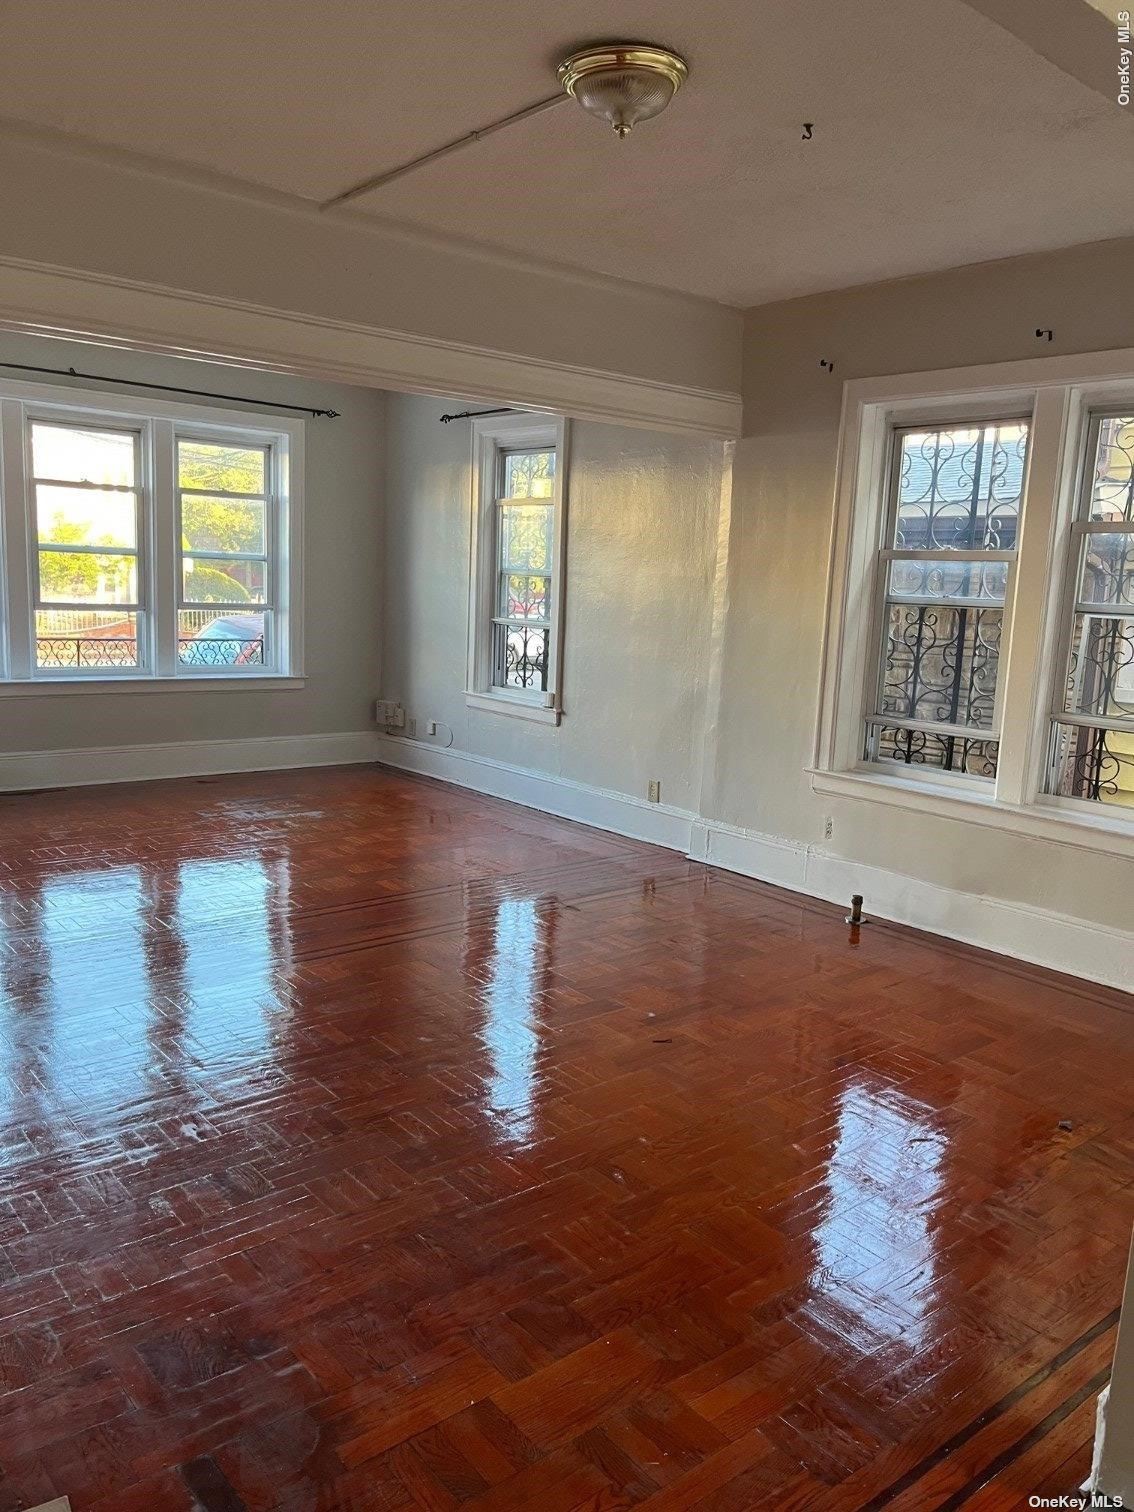 Apartment in Midwood - E. 35th Street  Brooklyn, NY 11210